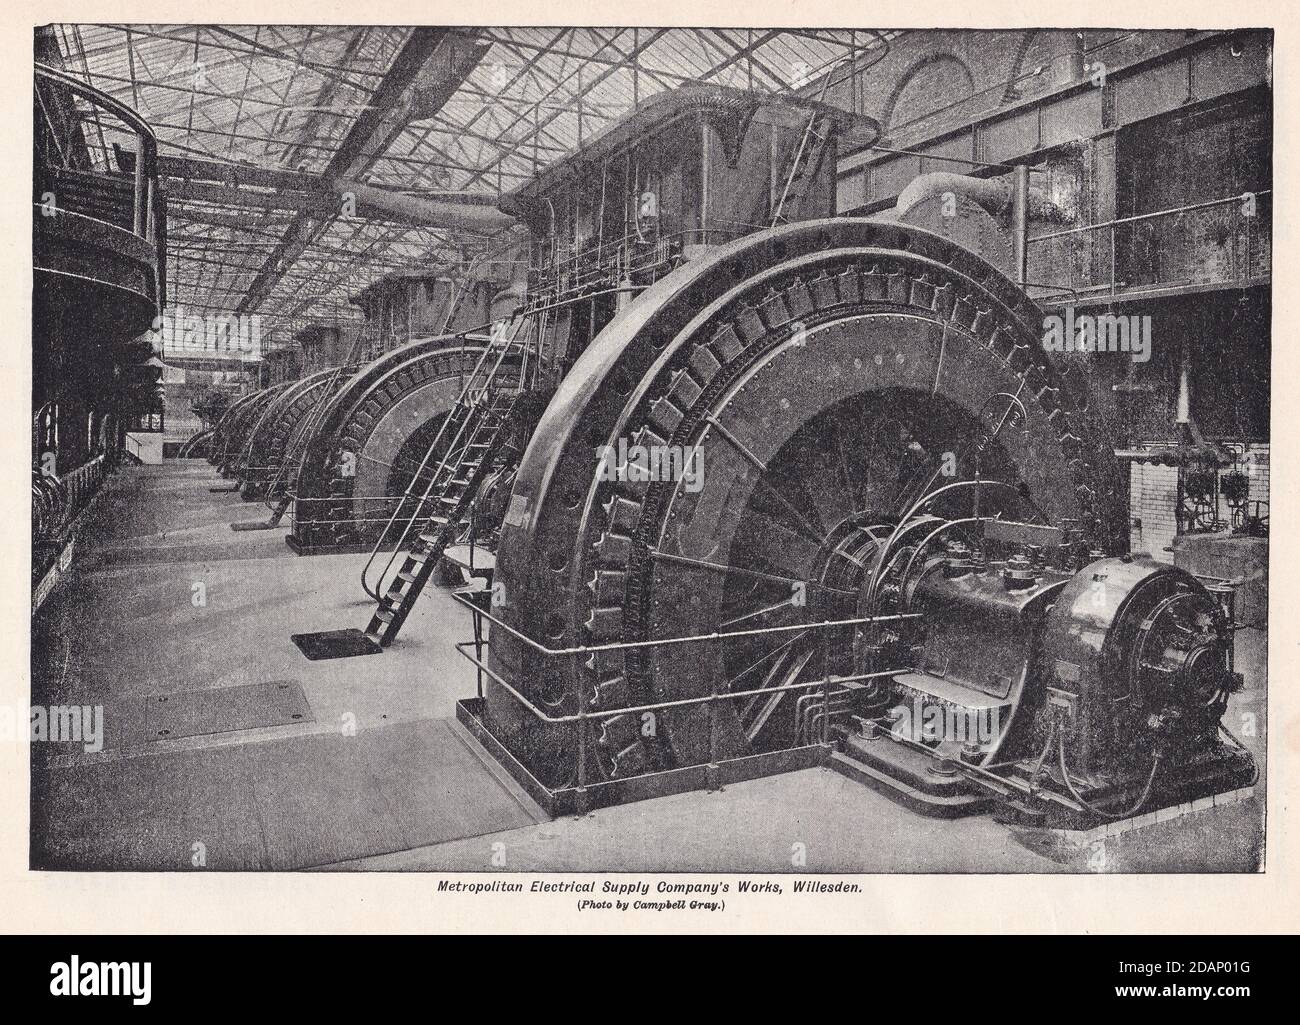 Metropolitan Electrical Supply Company's Works, Willesden - 1900s Stock Photo